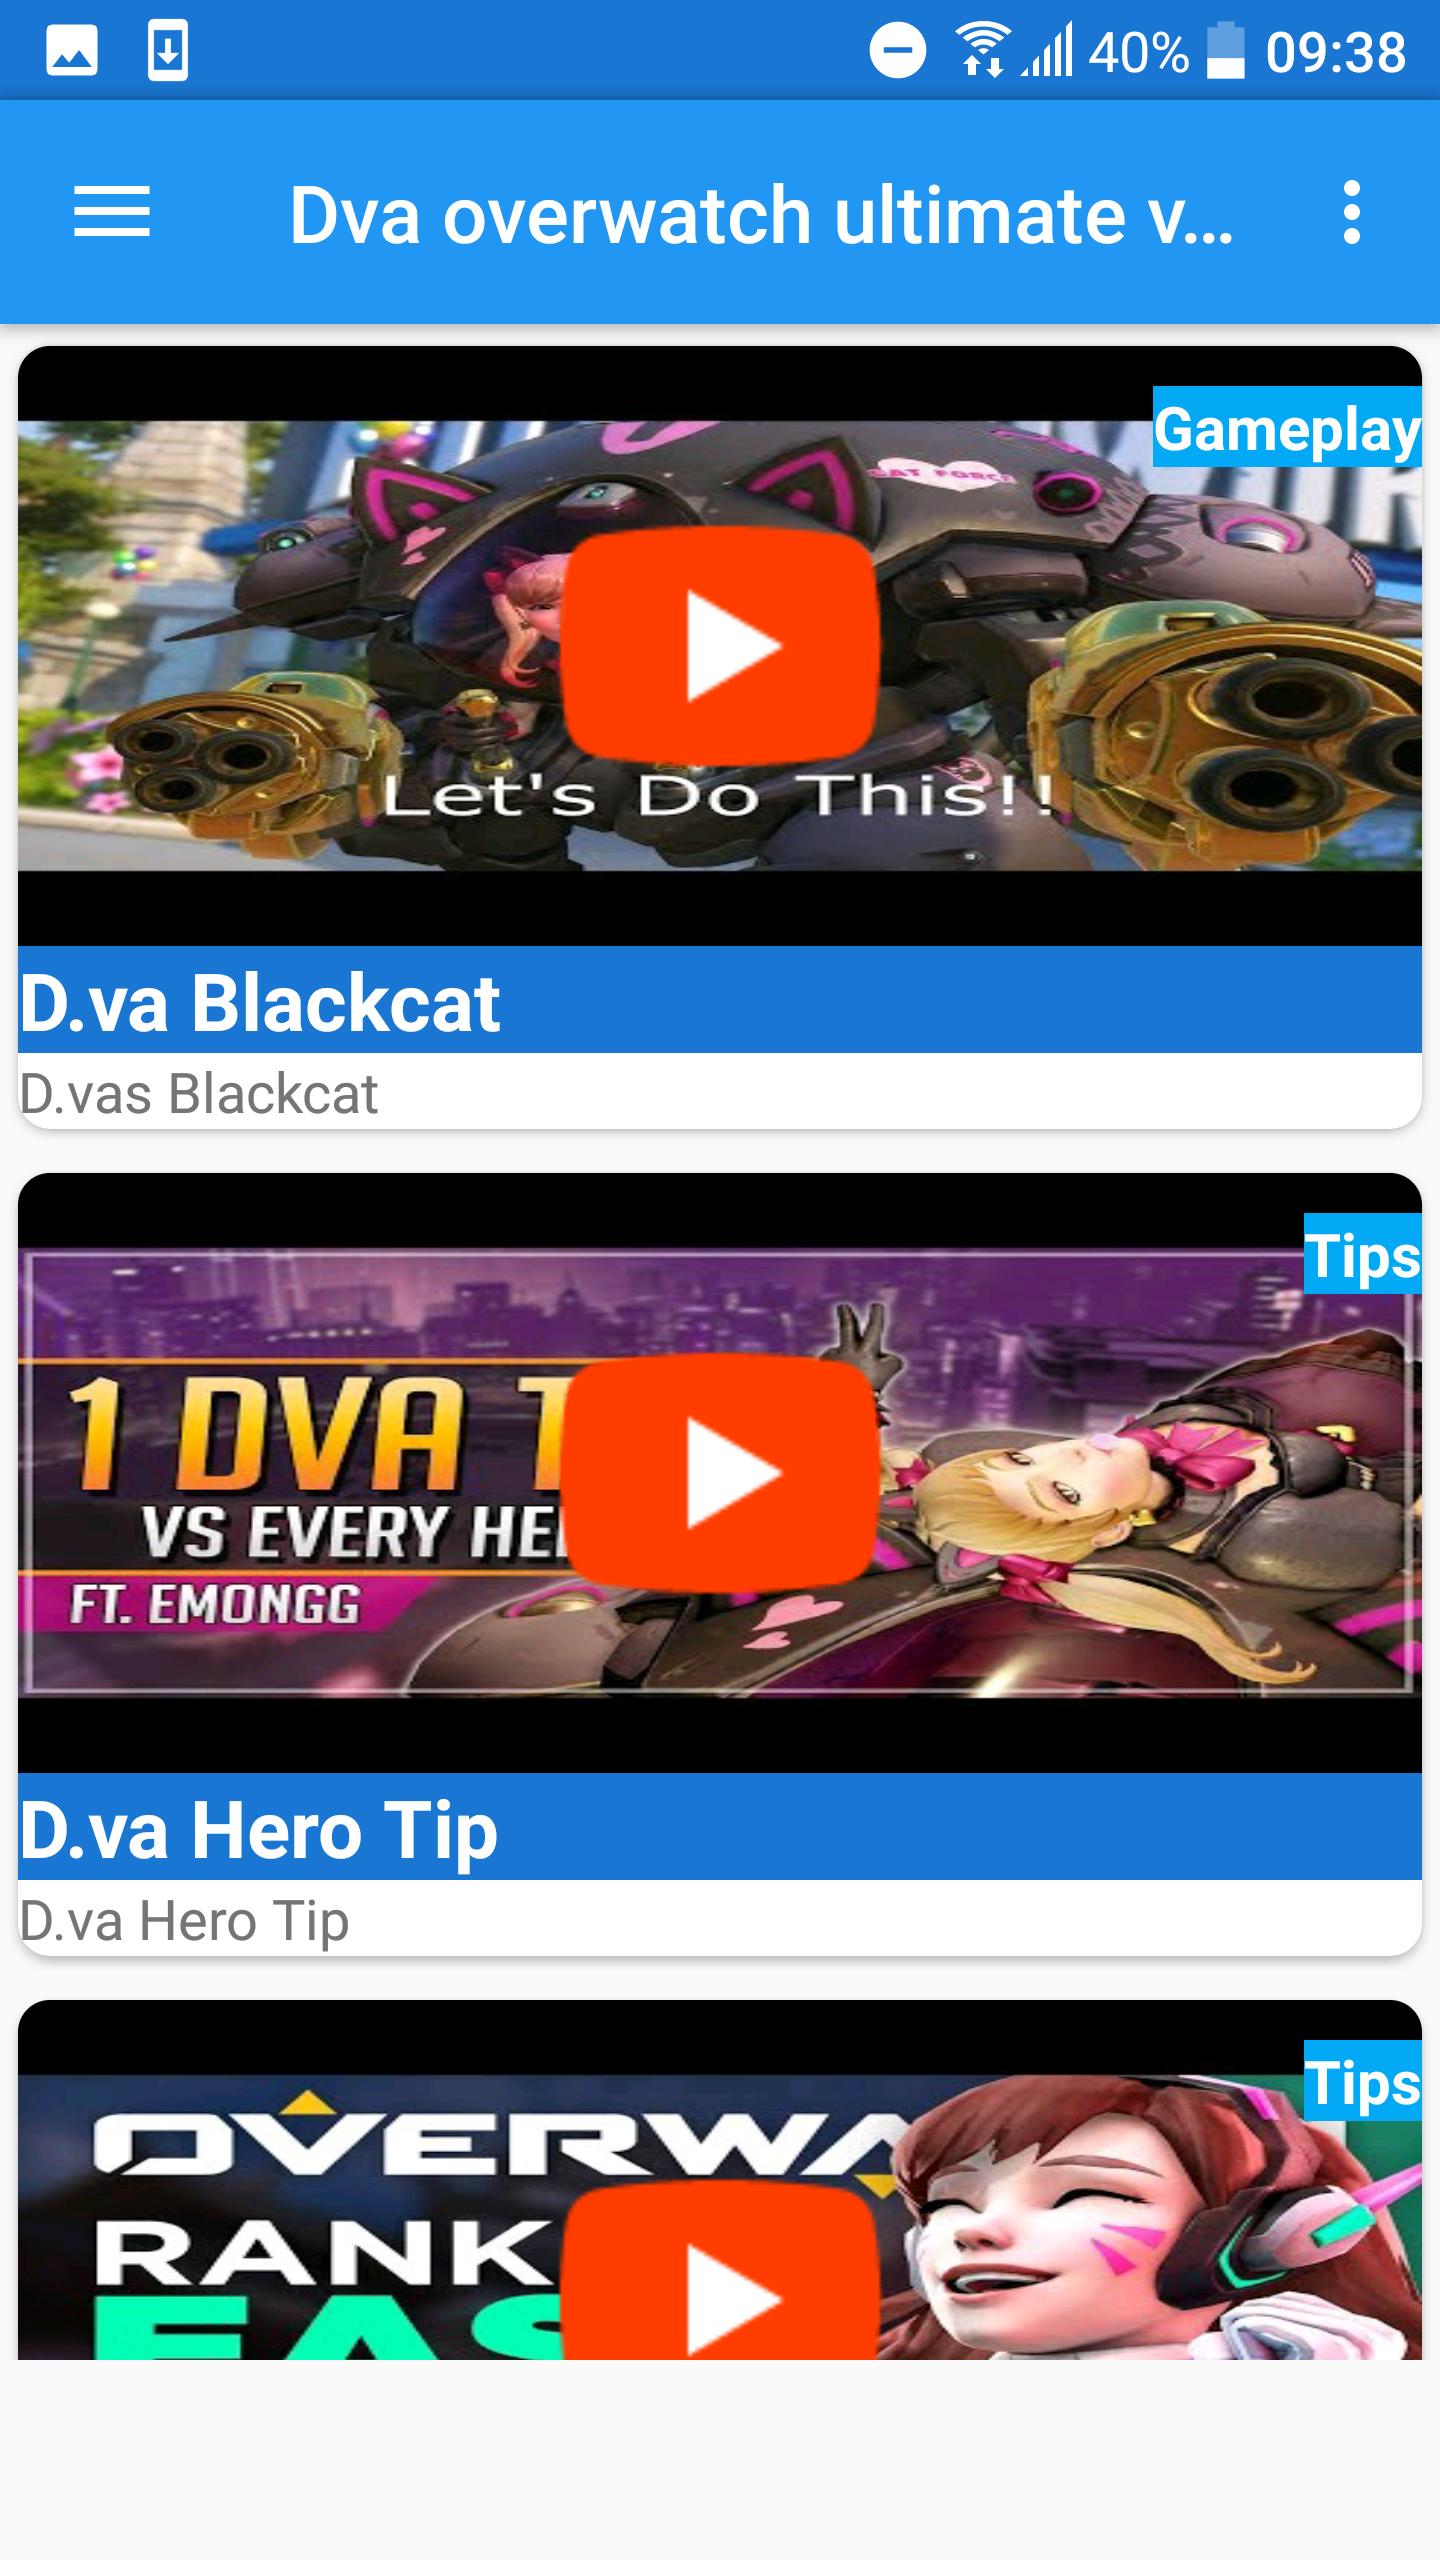 Dva Overwatch Ultimate Videos for Android - APK Download